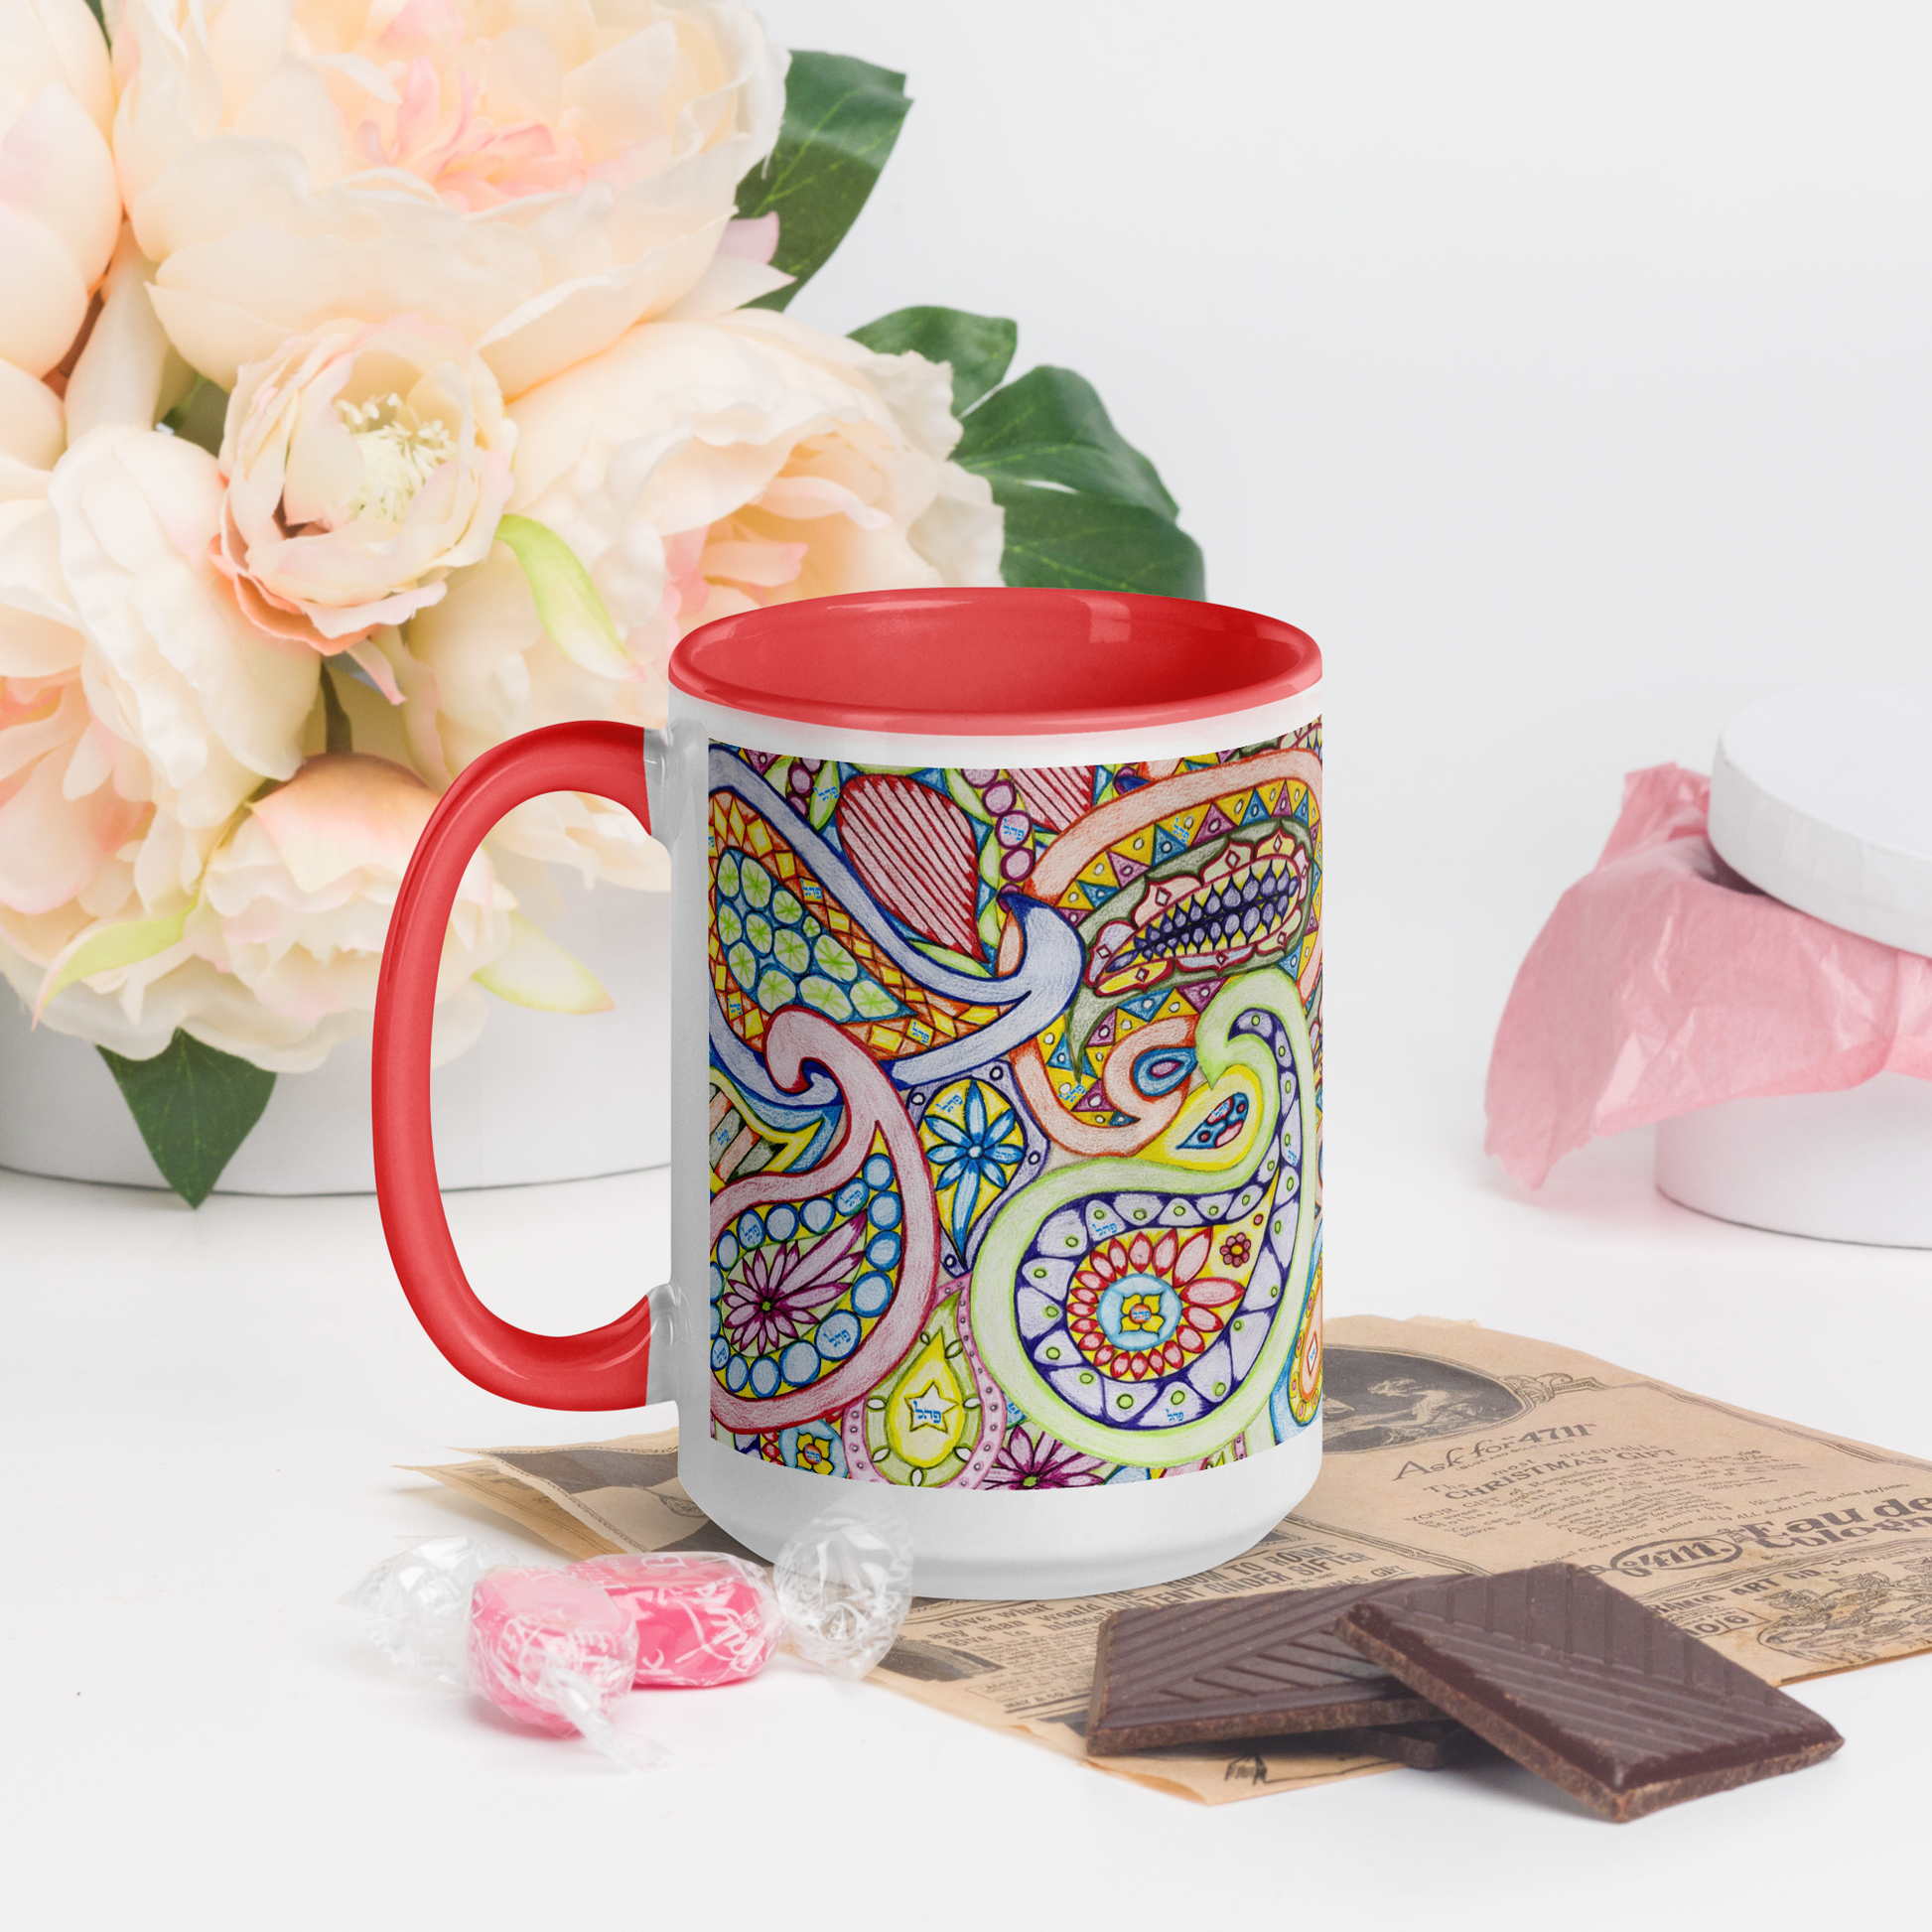  Mug-with-Color-Inside-15oz-Red-Remove-Addictions-(72-Names-of-God-Pey-Hey-Lamed)-5-137online.com